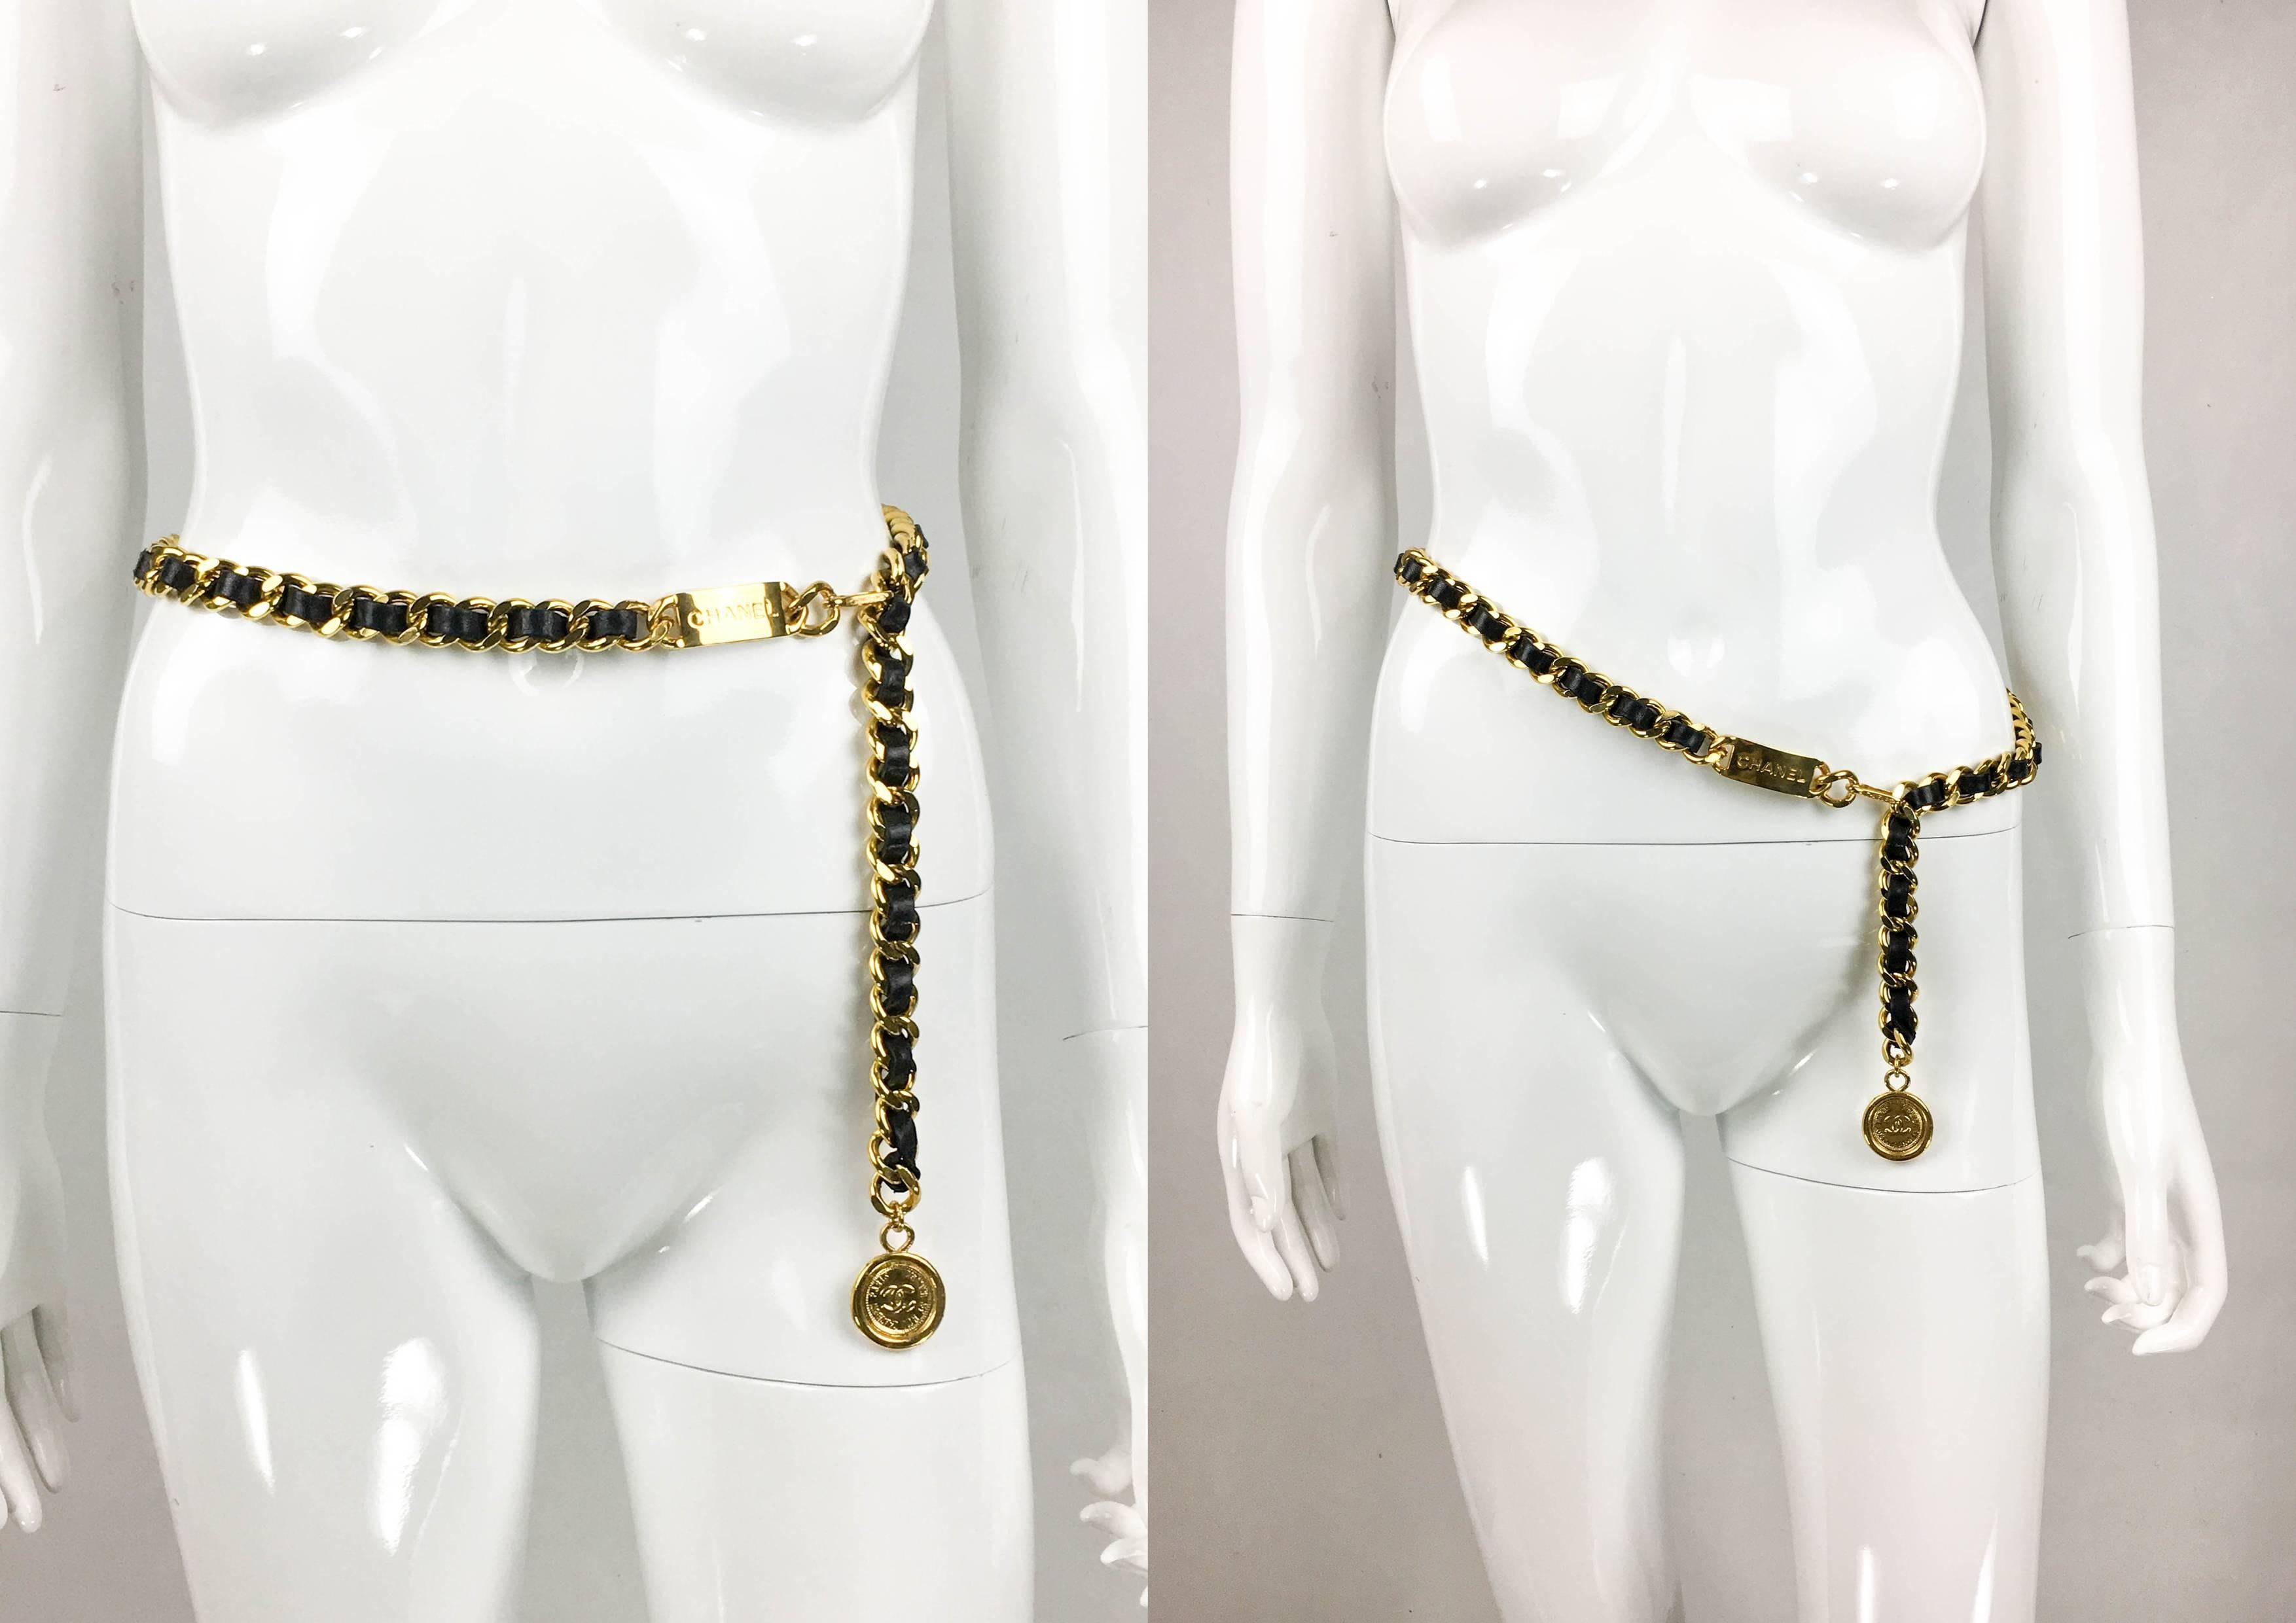 Vintage Chanel Gilt Chain and Leather Woven Belt / Necklace. This striking belt was crafted for the 1994 Spring / Summer Runway Show (please refer to photos). The chunky gilt chain is interwoven with black leather. On one end, there is a plaque